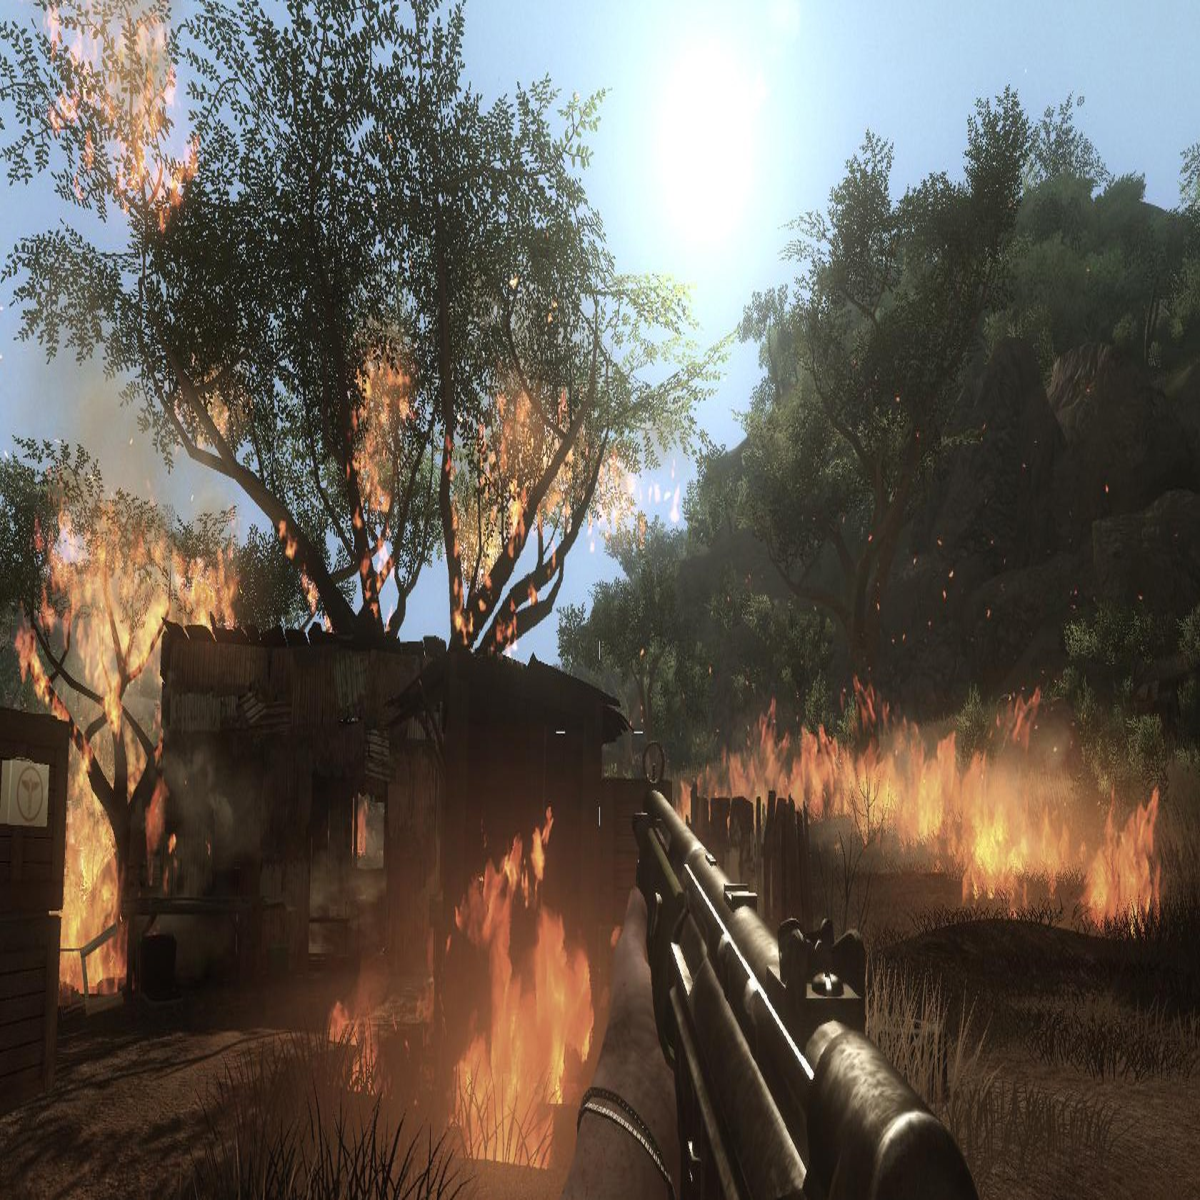 Far Cry 2 Review –